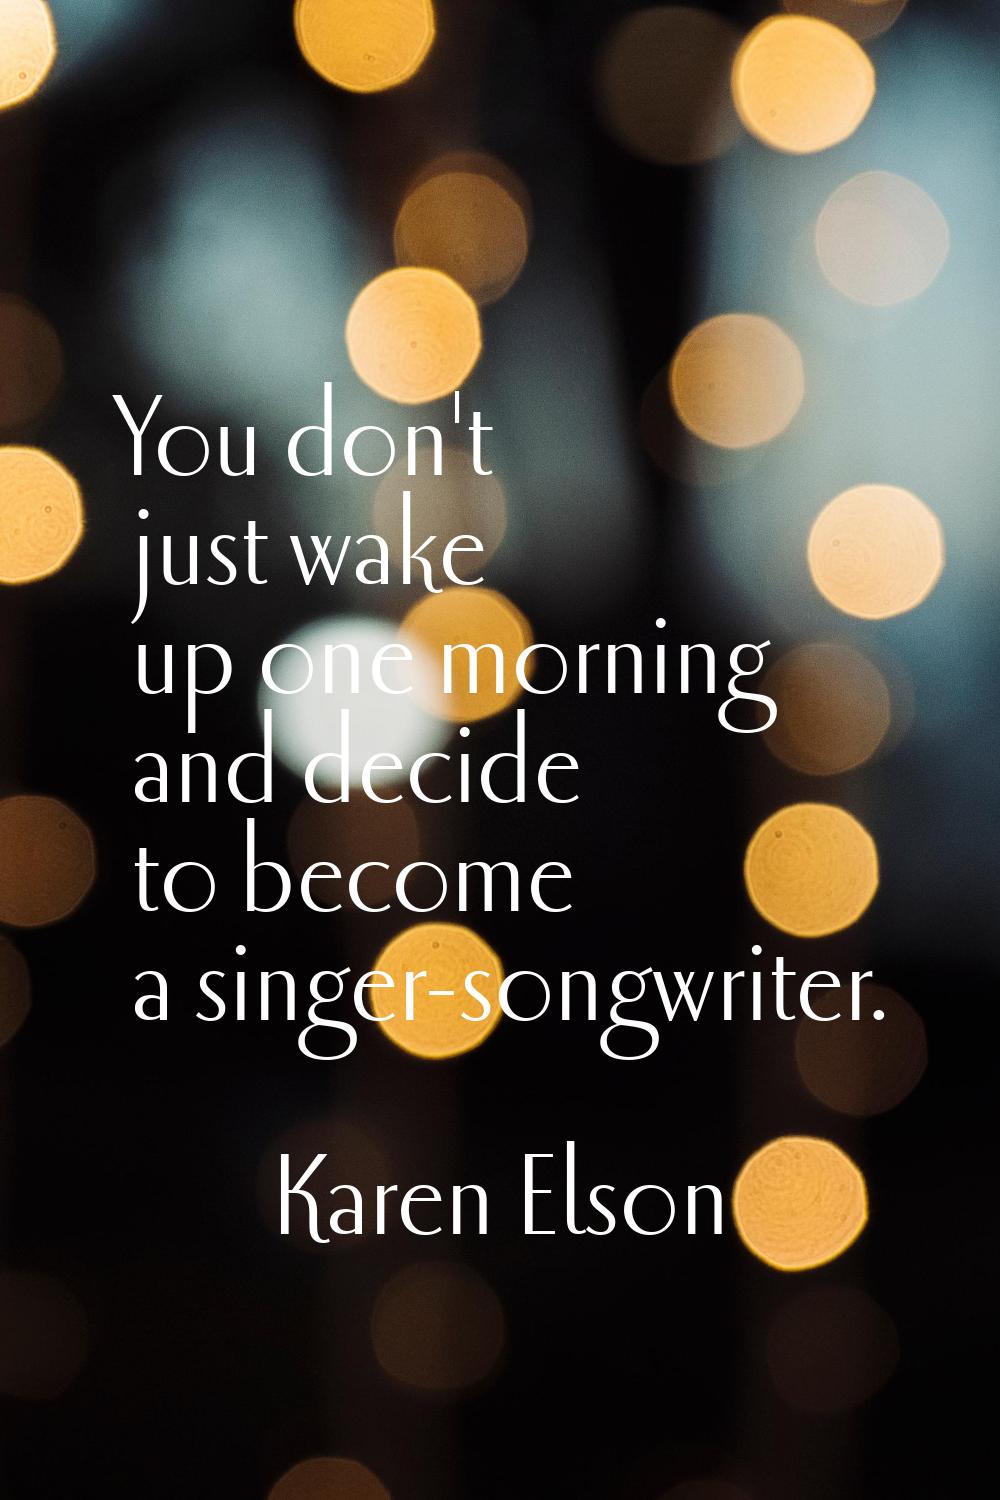 You don't just wake up one morning and decide to become a singer-songwriter.